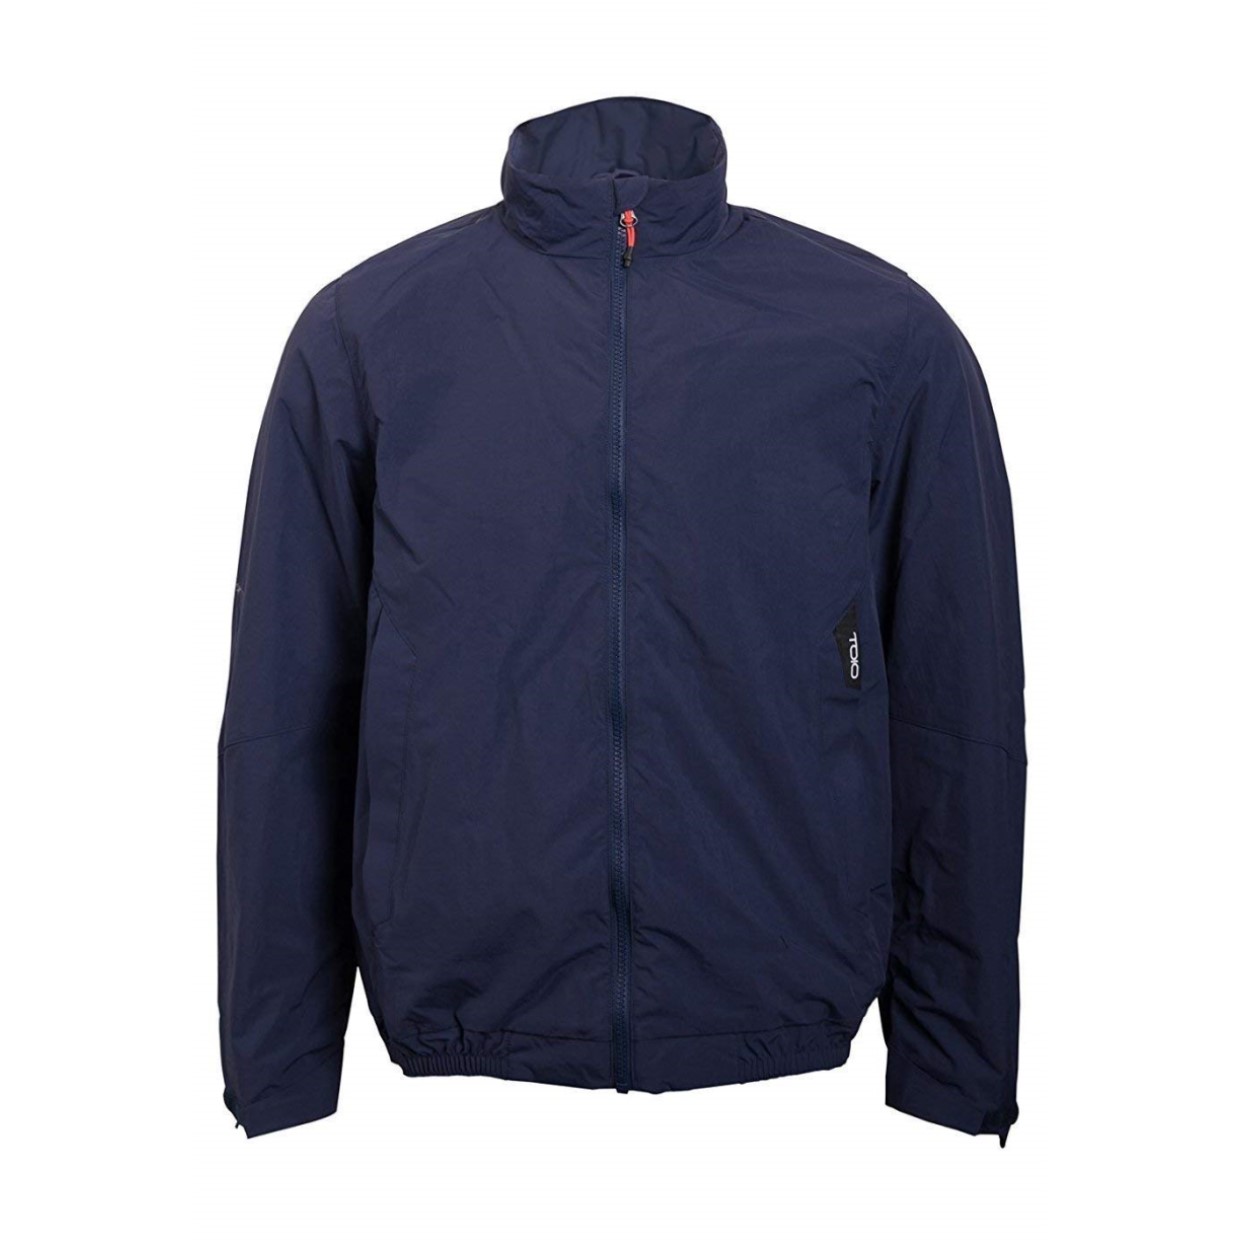 TOIO Cowes | Team Jacket at £129.00